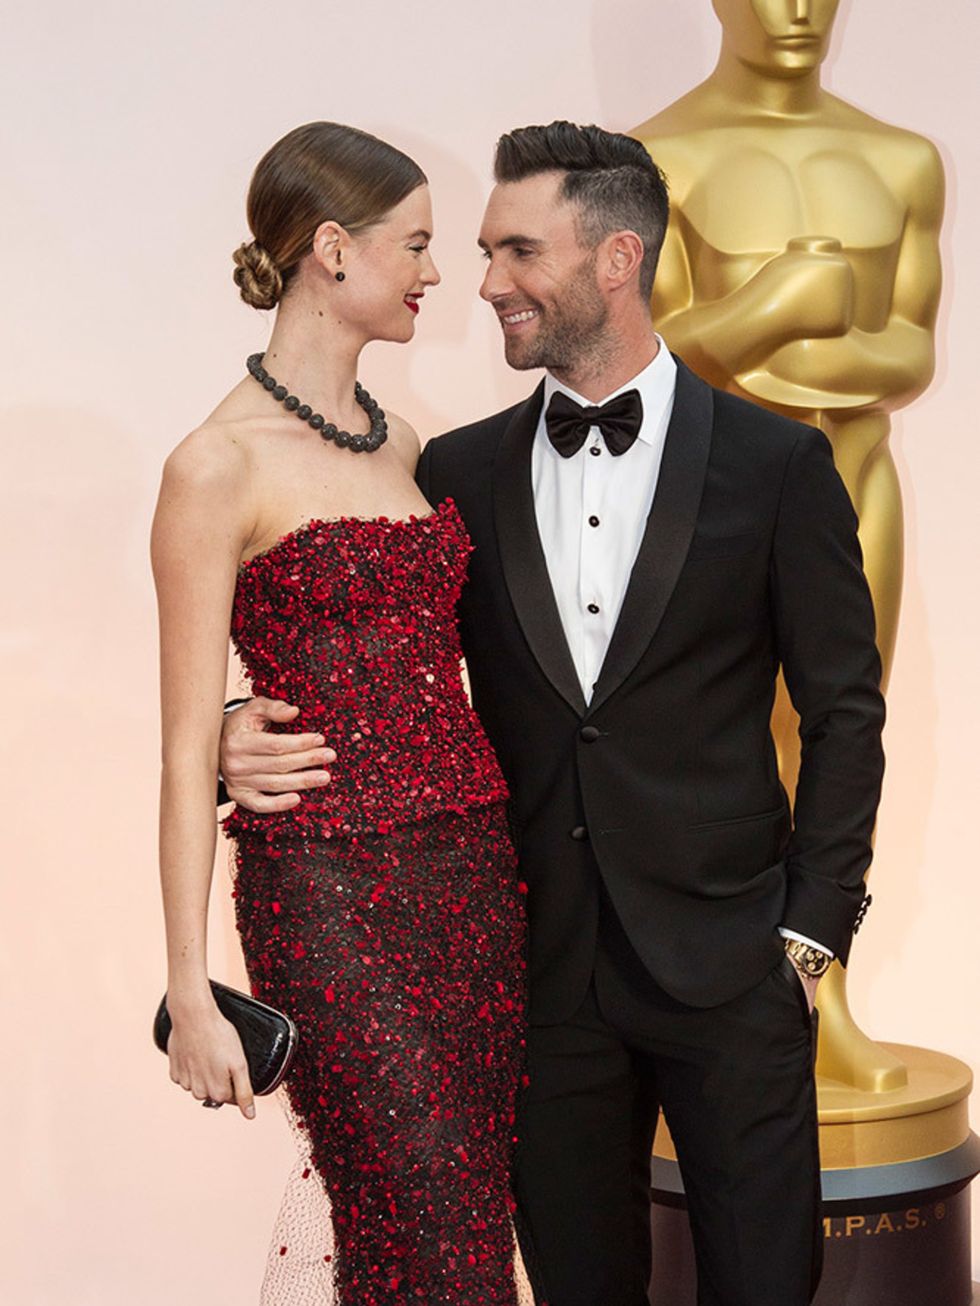 Behati Prinsloo and Adam Levine at the Academy Awards, February 2015.